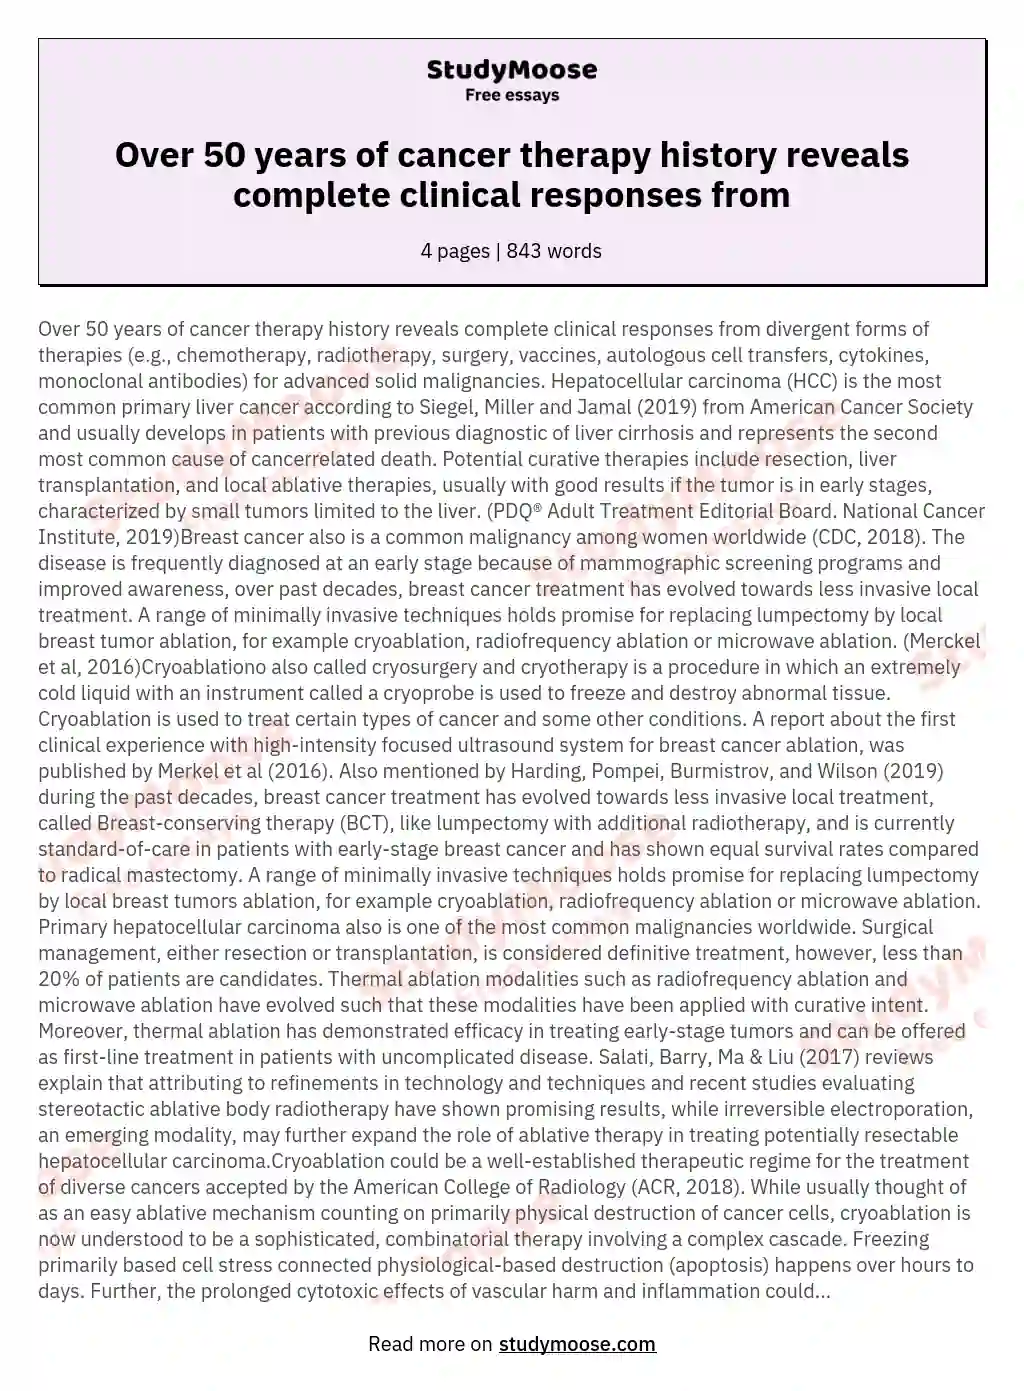 Over 50 years of cancer therapy history reveals complete clinical responses from